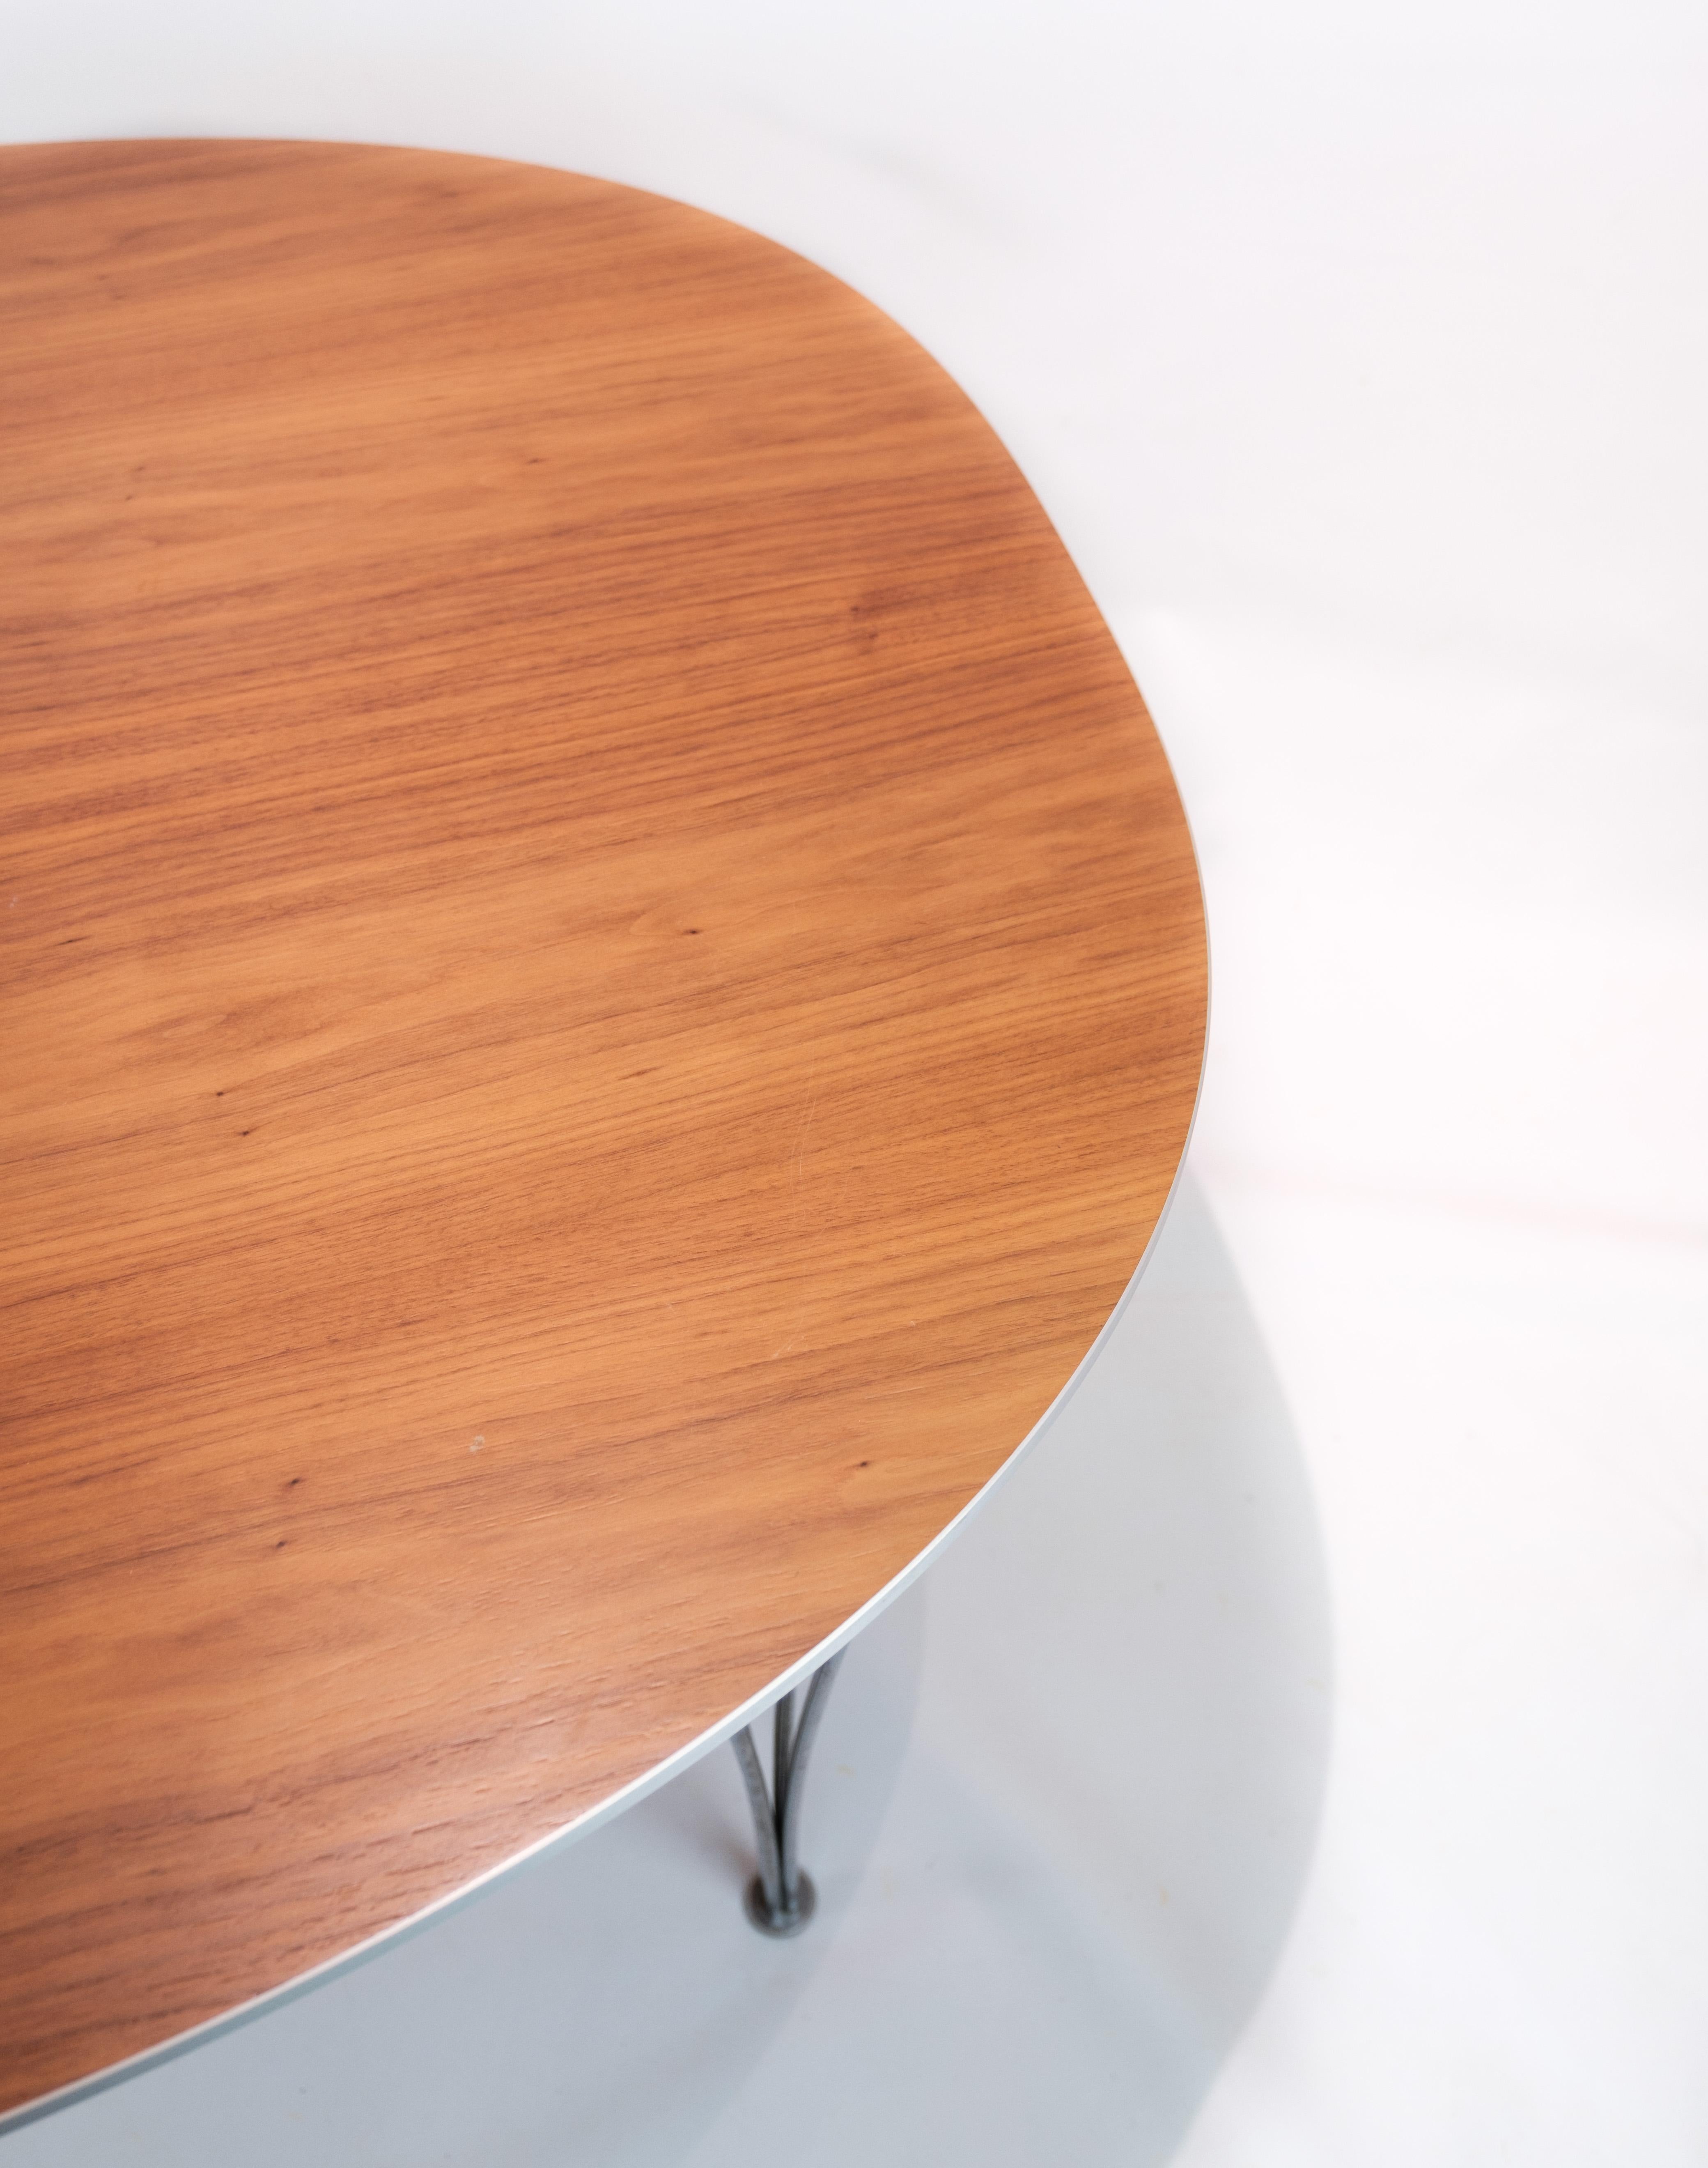 Danish Piet Hein Table, Model B612 with Walnut Surface and Steel Legs